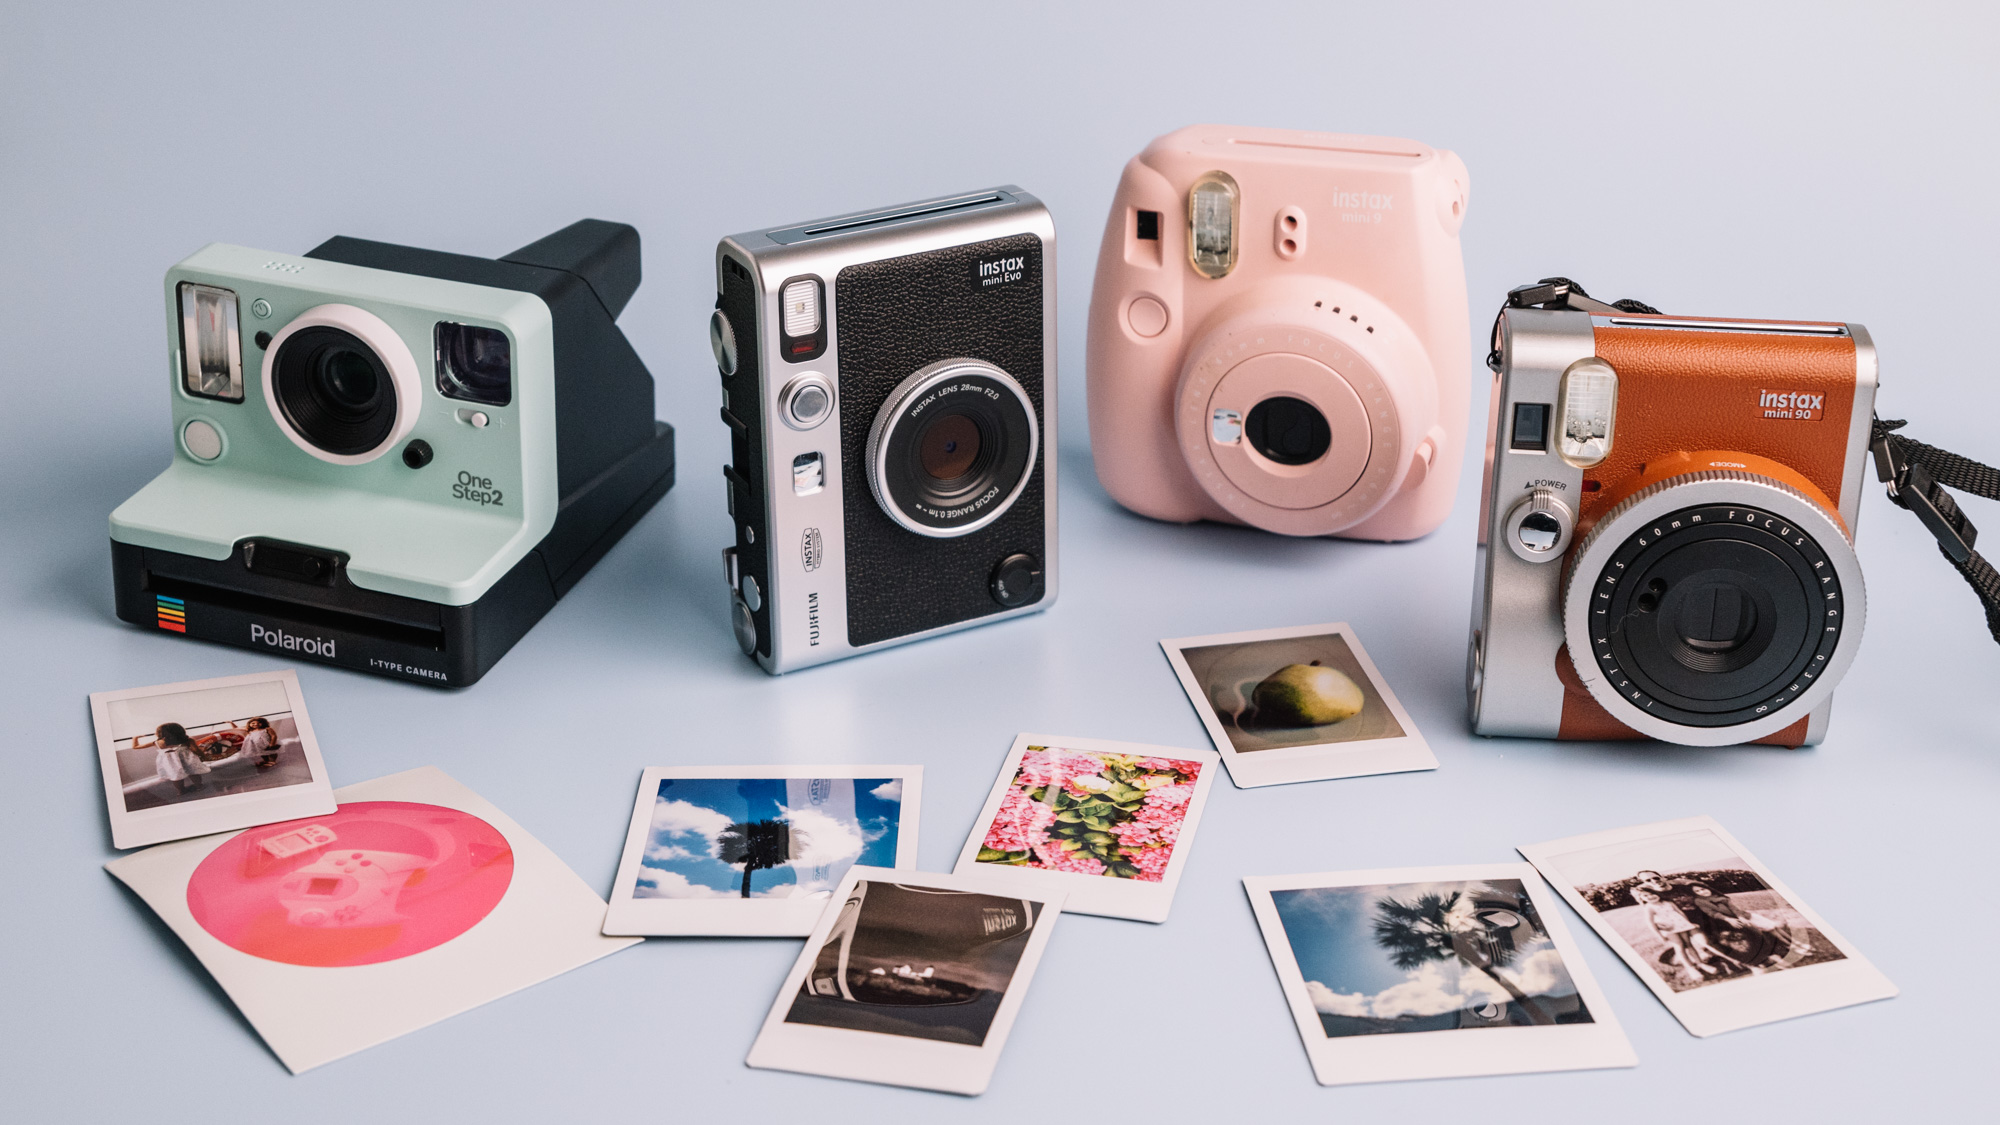 Fuji Instax and Polaroid Camera Buyer's Guide! - Casual Photophile